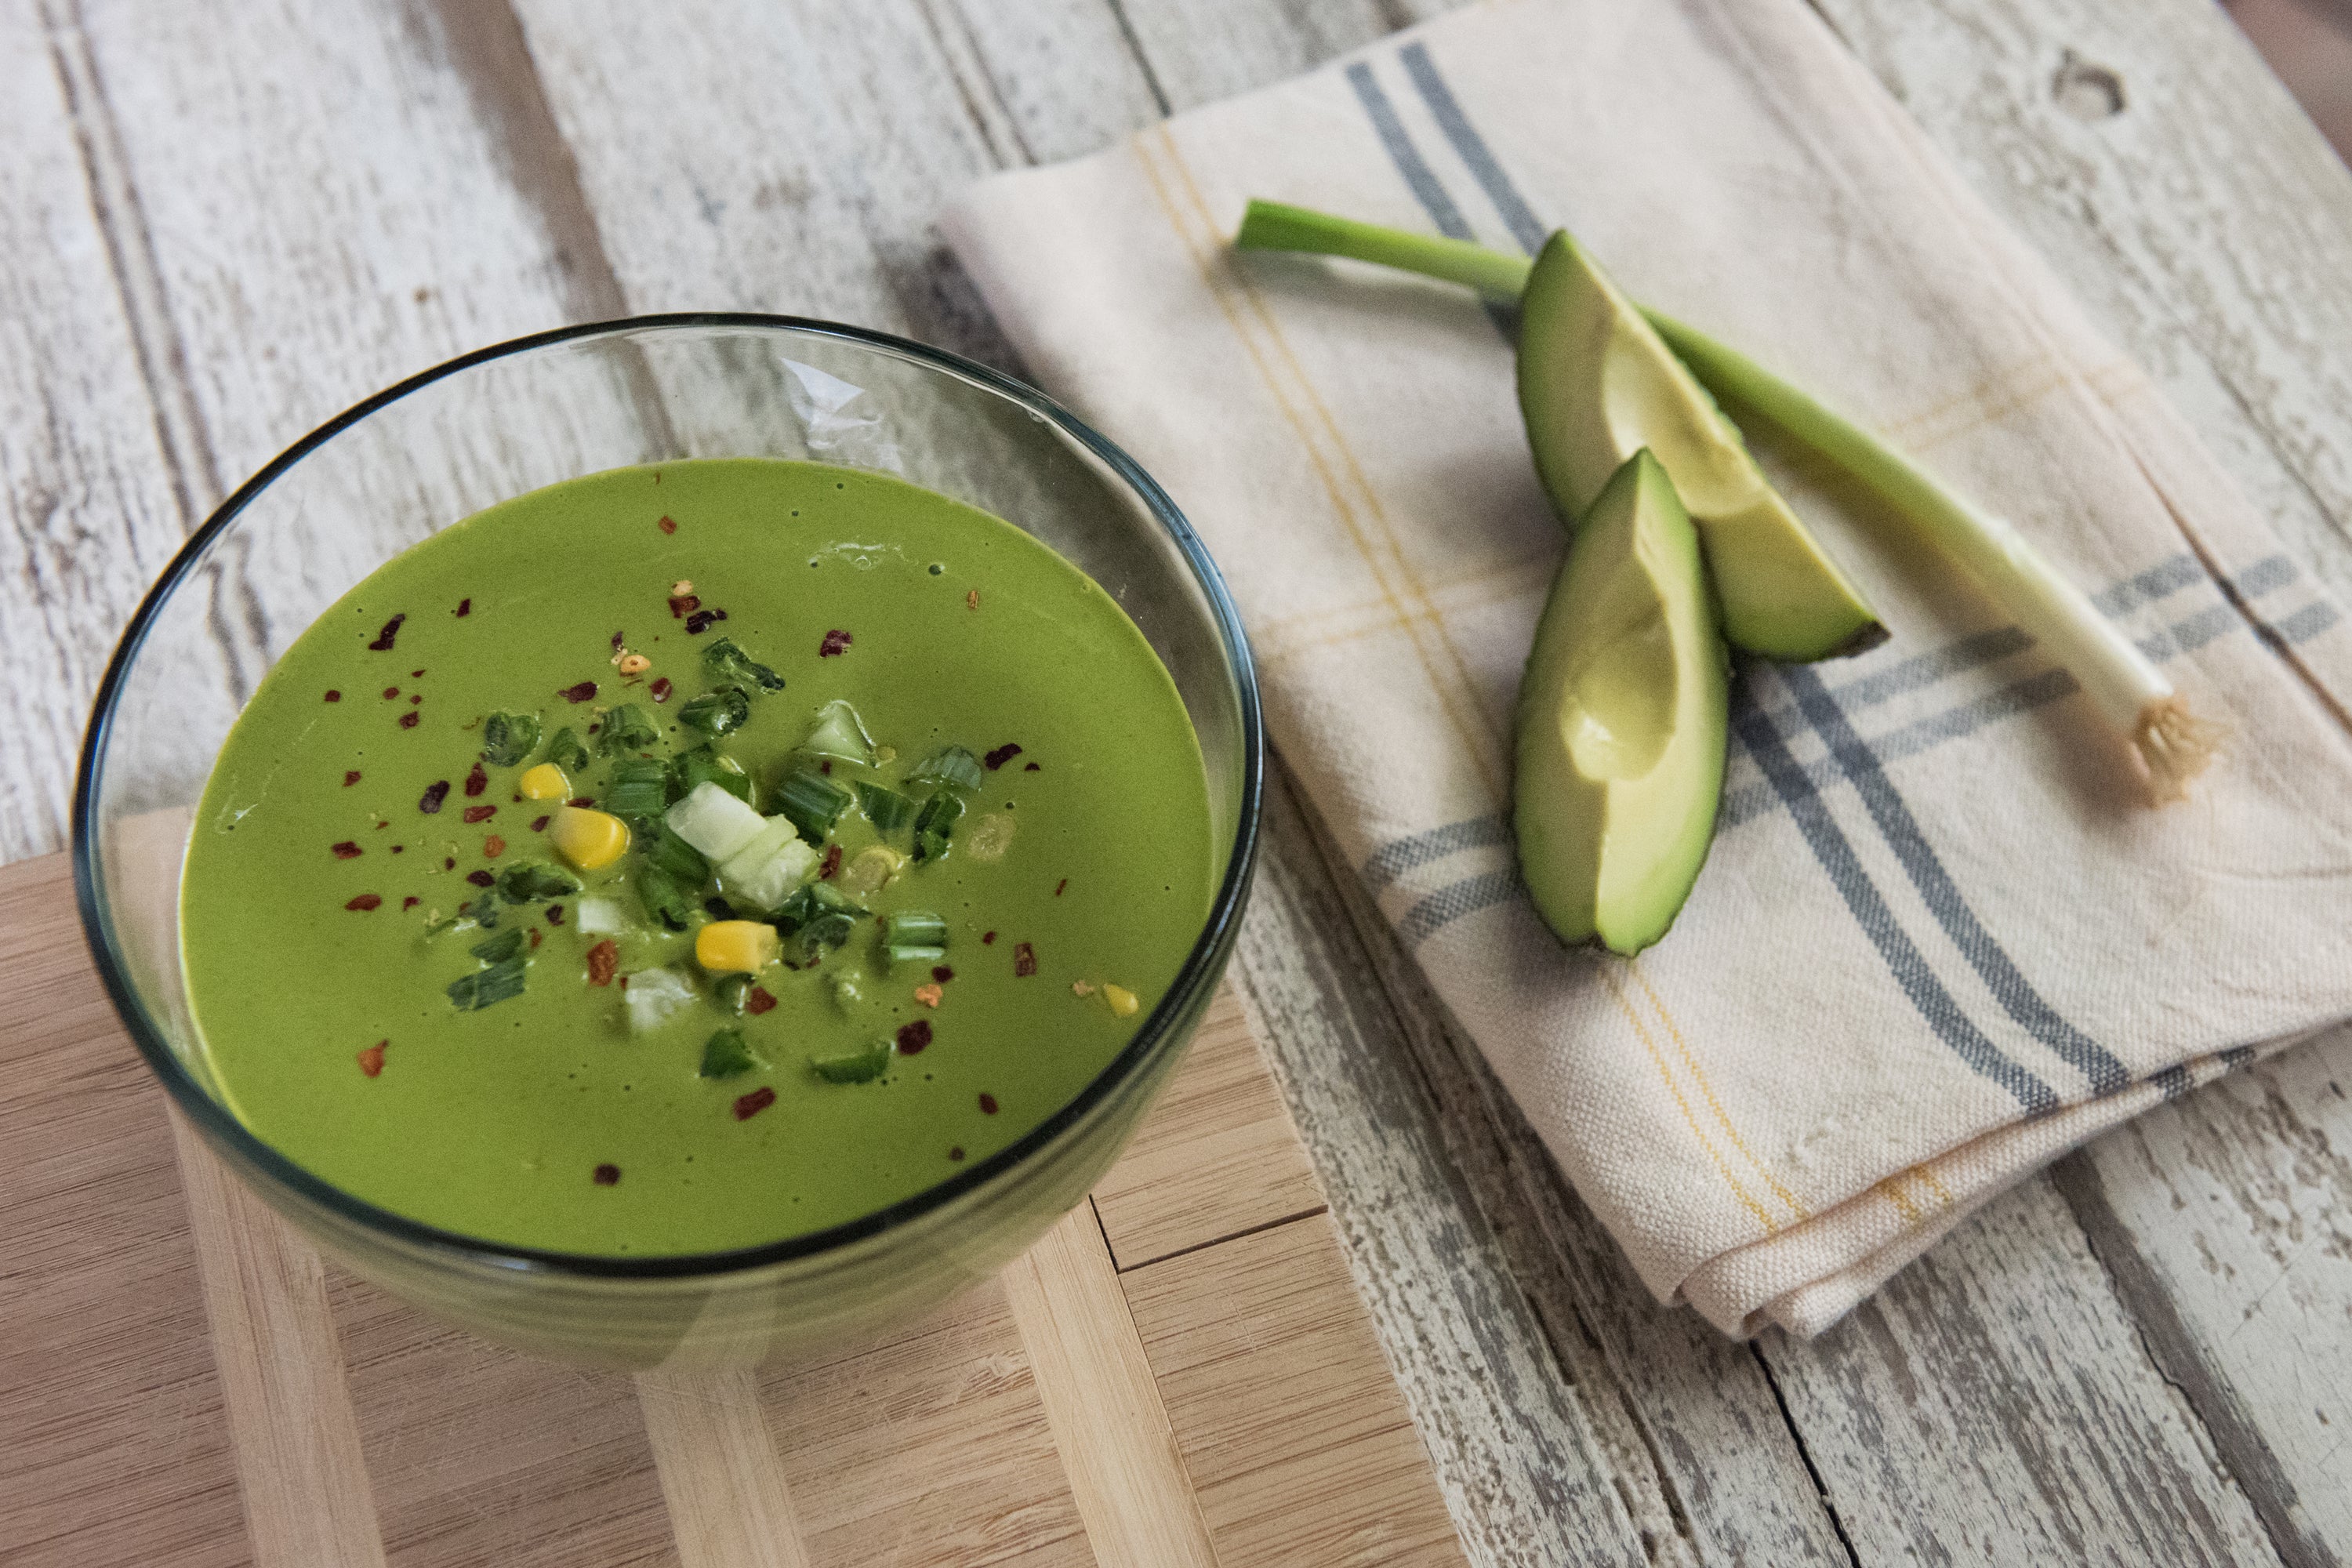 Chilled Zucchini and Avocado Soup